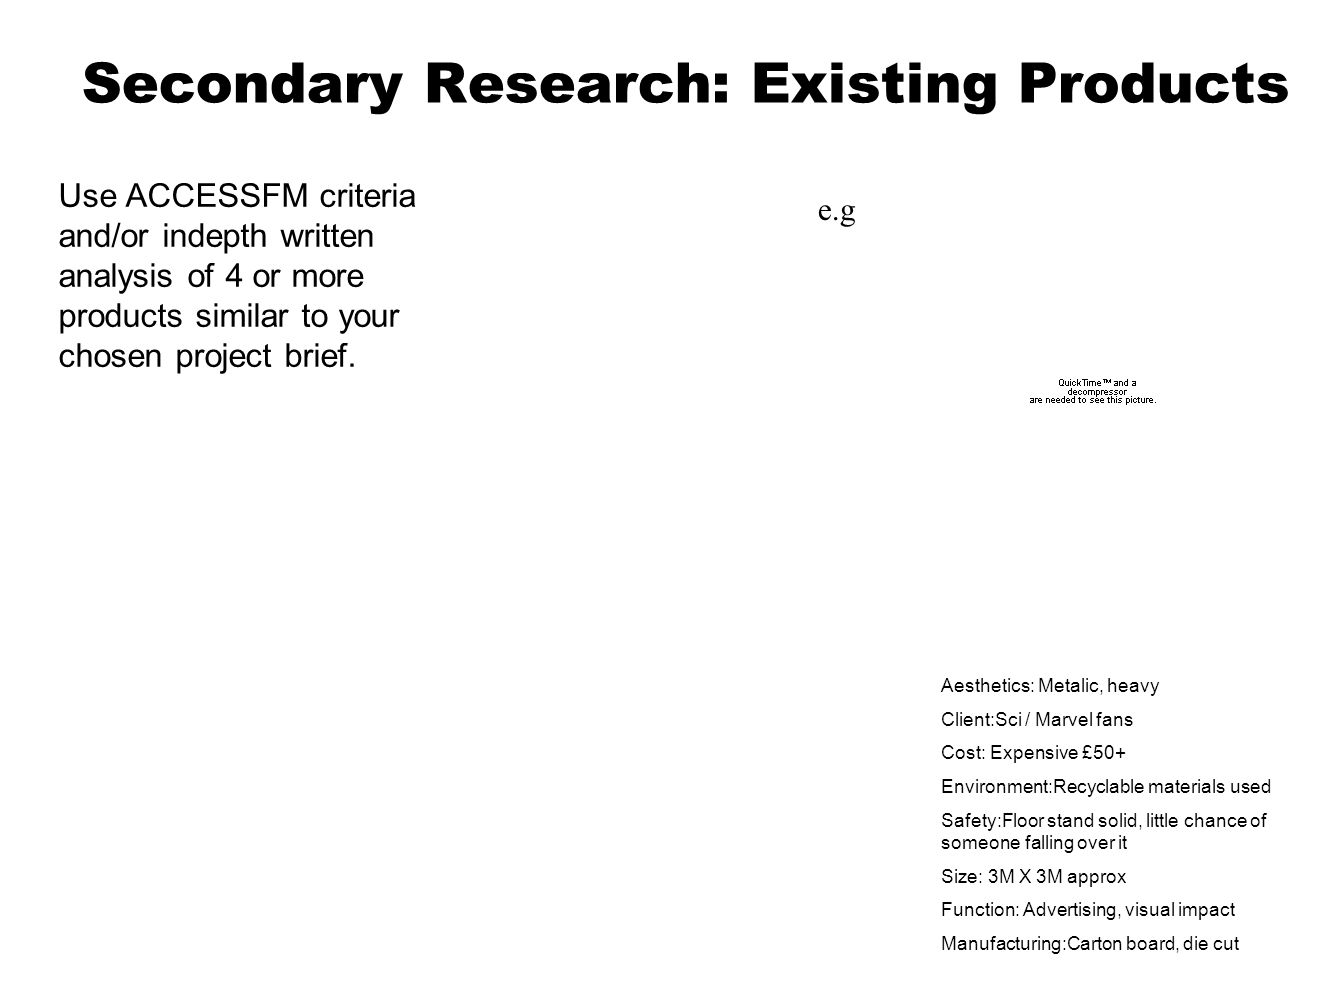 Secondary Research: Existing Products Use ACCESSFM criteria and/or indepth written analysis of 4 or more products similar to your chosen project brief.